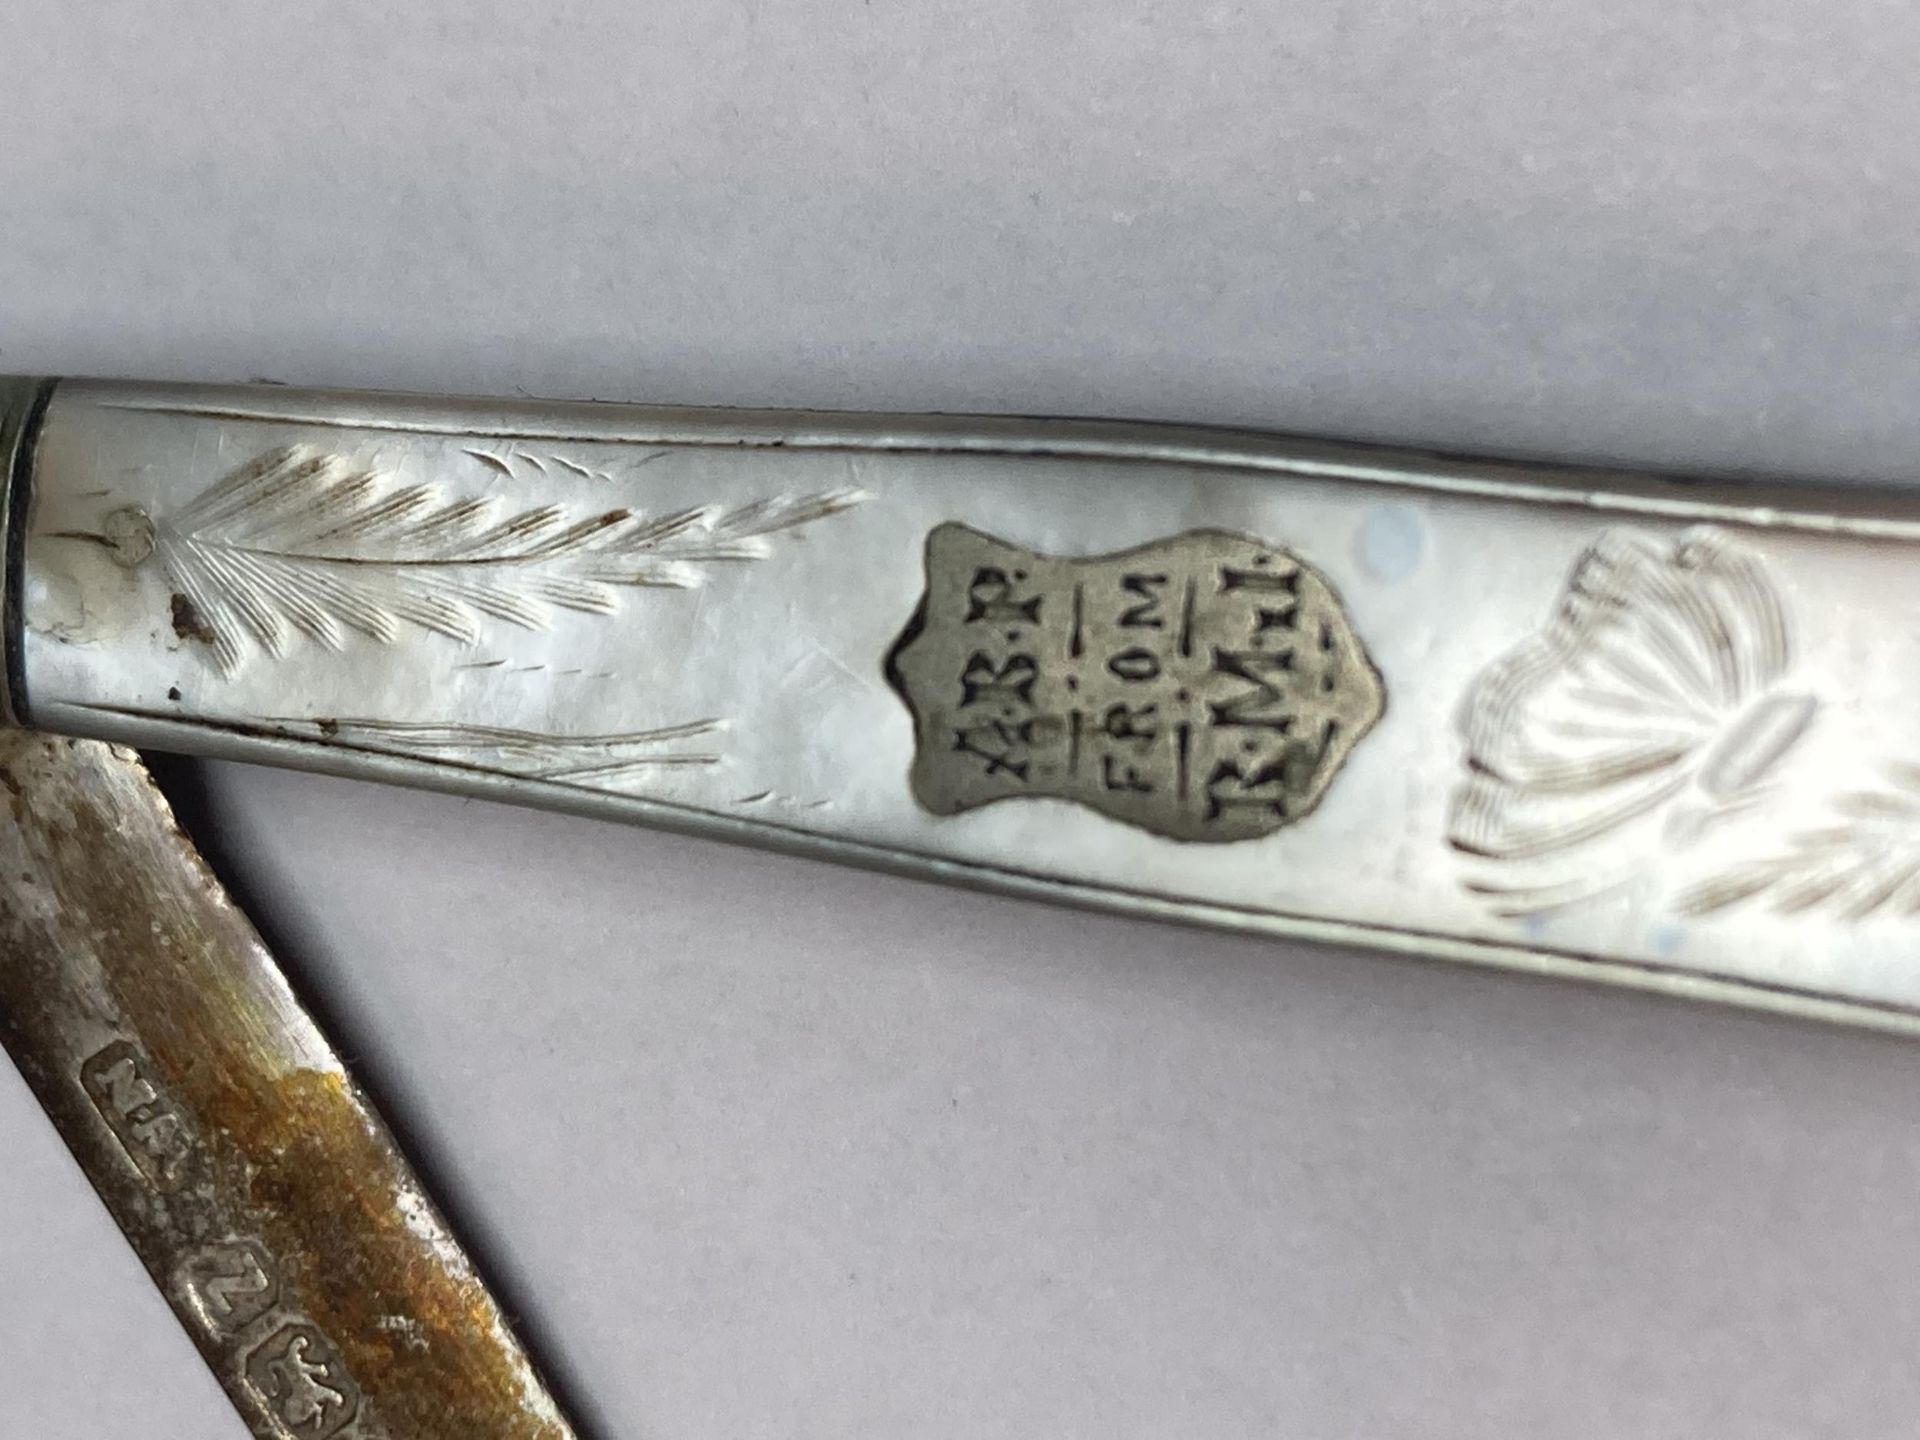 A HALLMARKED SHEFFIELD SILVER FRUIT KNIFE WITH MOTHER OF PEARL HANDLE - Image 3 of 4